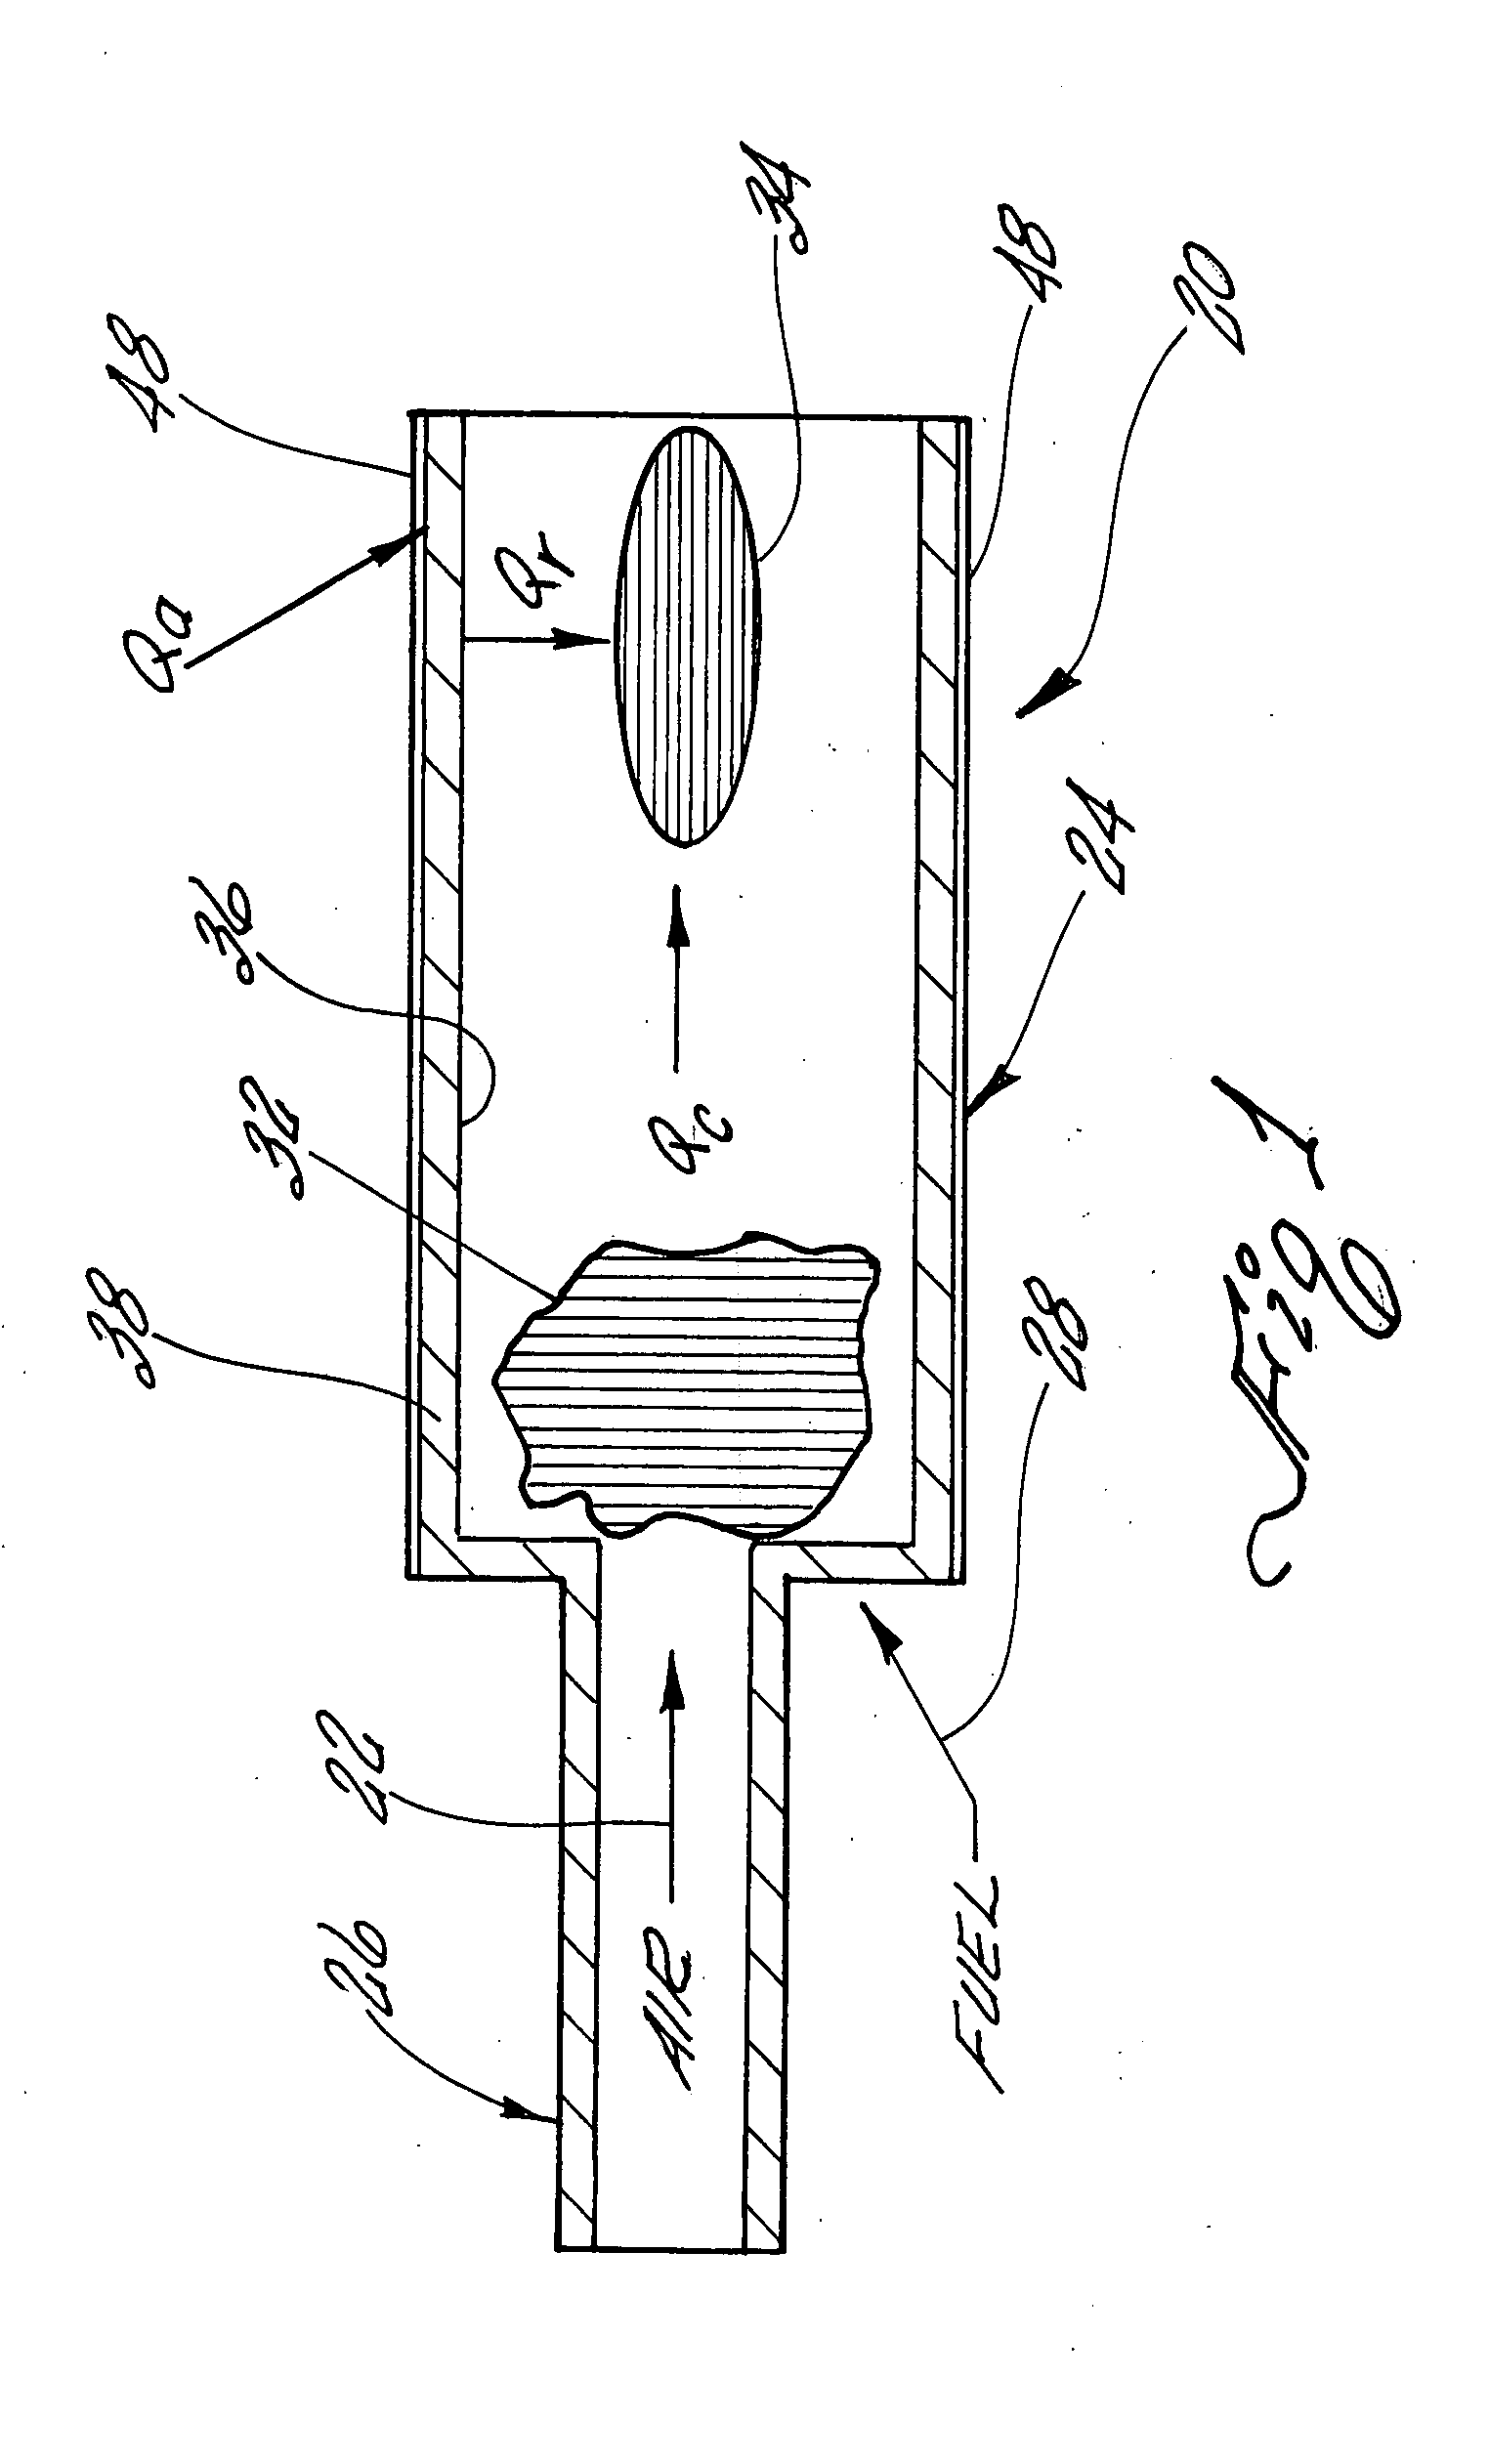 Combustion device to provide a controlled heat flux environment